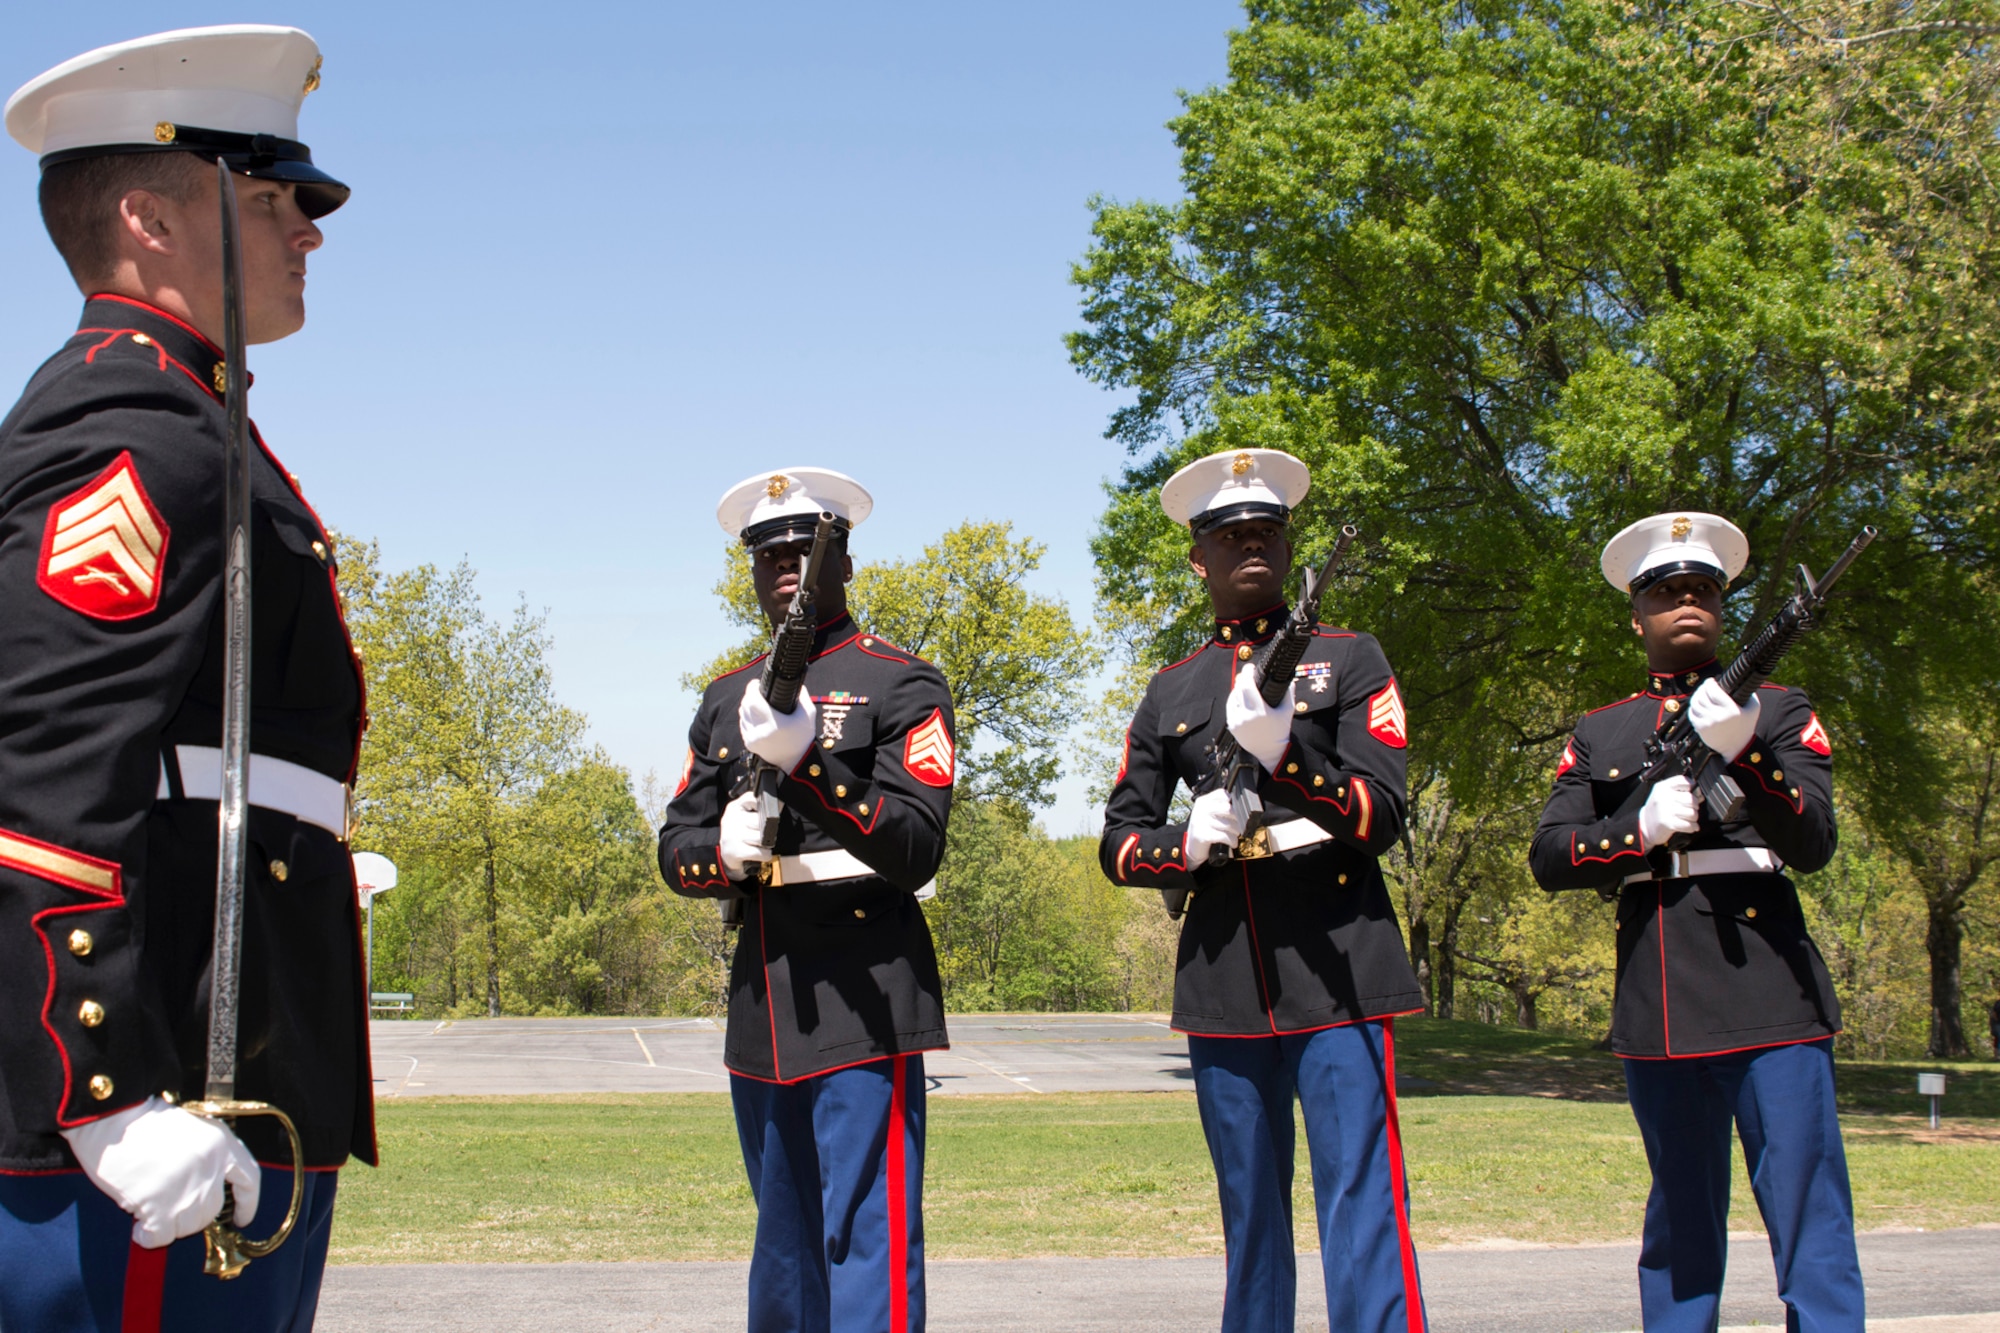 (L-R) U.S. Marine Sgts. Blake Decarlo, Jovious Wade, Frankie Ezell and Lance Cpl. Keithen Parys, prepare to perform a 3-volley rifle salute at the conclusion of the 11th Annual Tribute to Fallen Heroes Ceremony in Sherwood, Ark., Apr. 9, 2016.  The Marines are assigned to India Company, 3rd Battalion, 23rd Marines, 4th Marine Division United States Marine Corp, Camp Pike, North Little Rock, Ark. (U.S. Air Force photo by Master Sgt. Jeff Walston/released) 